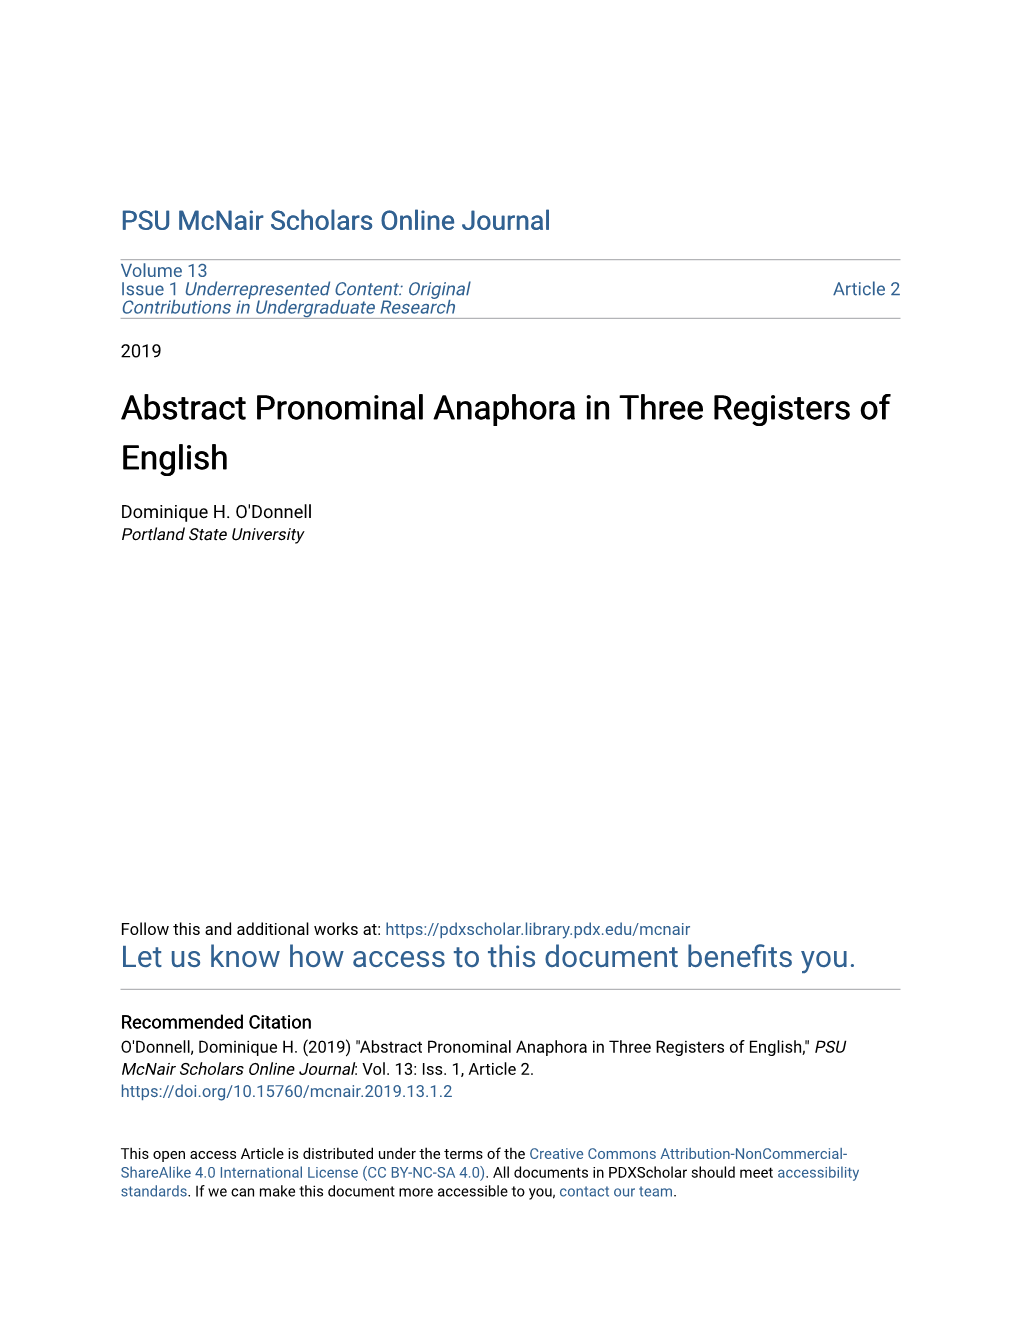 Abstract Pronominal Anaphora in Three Registers of English